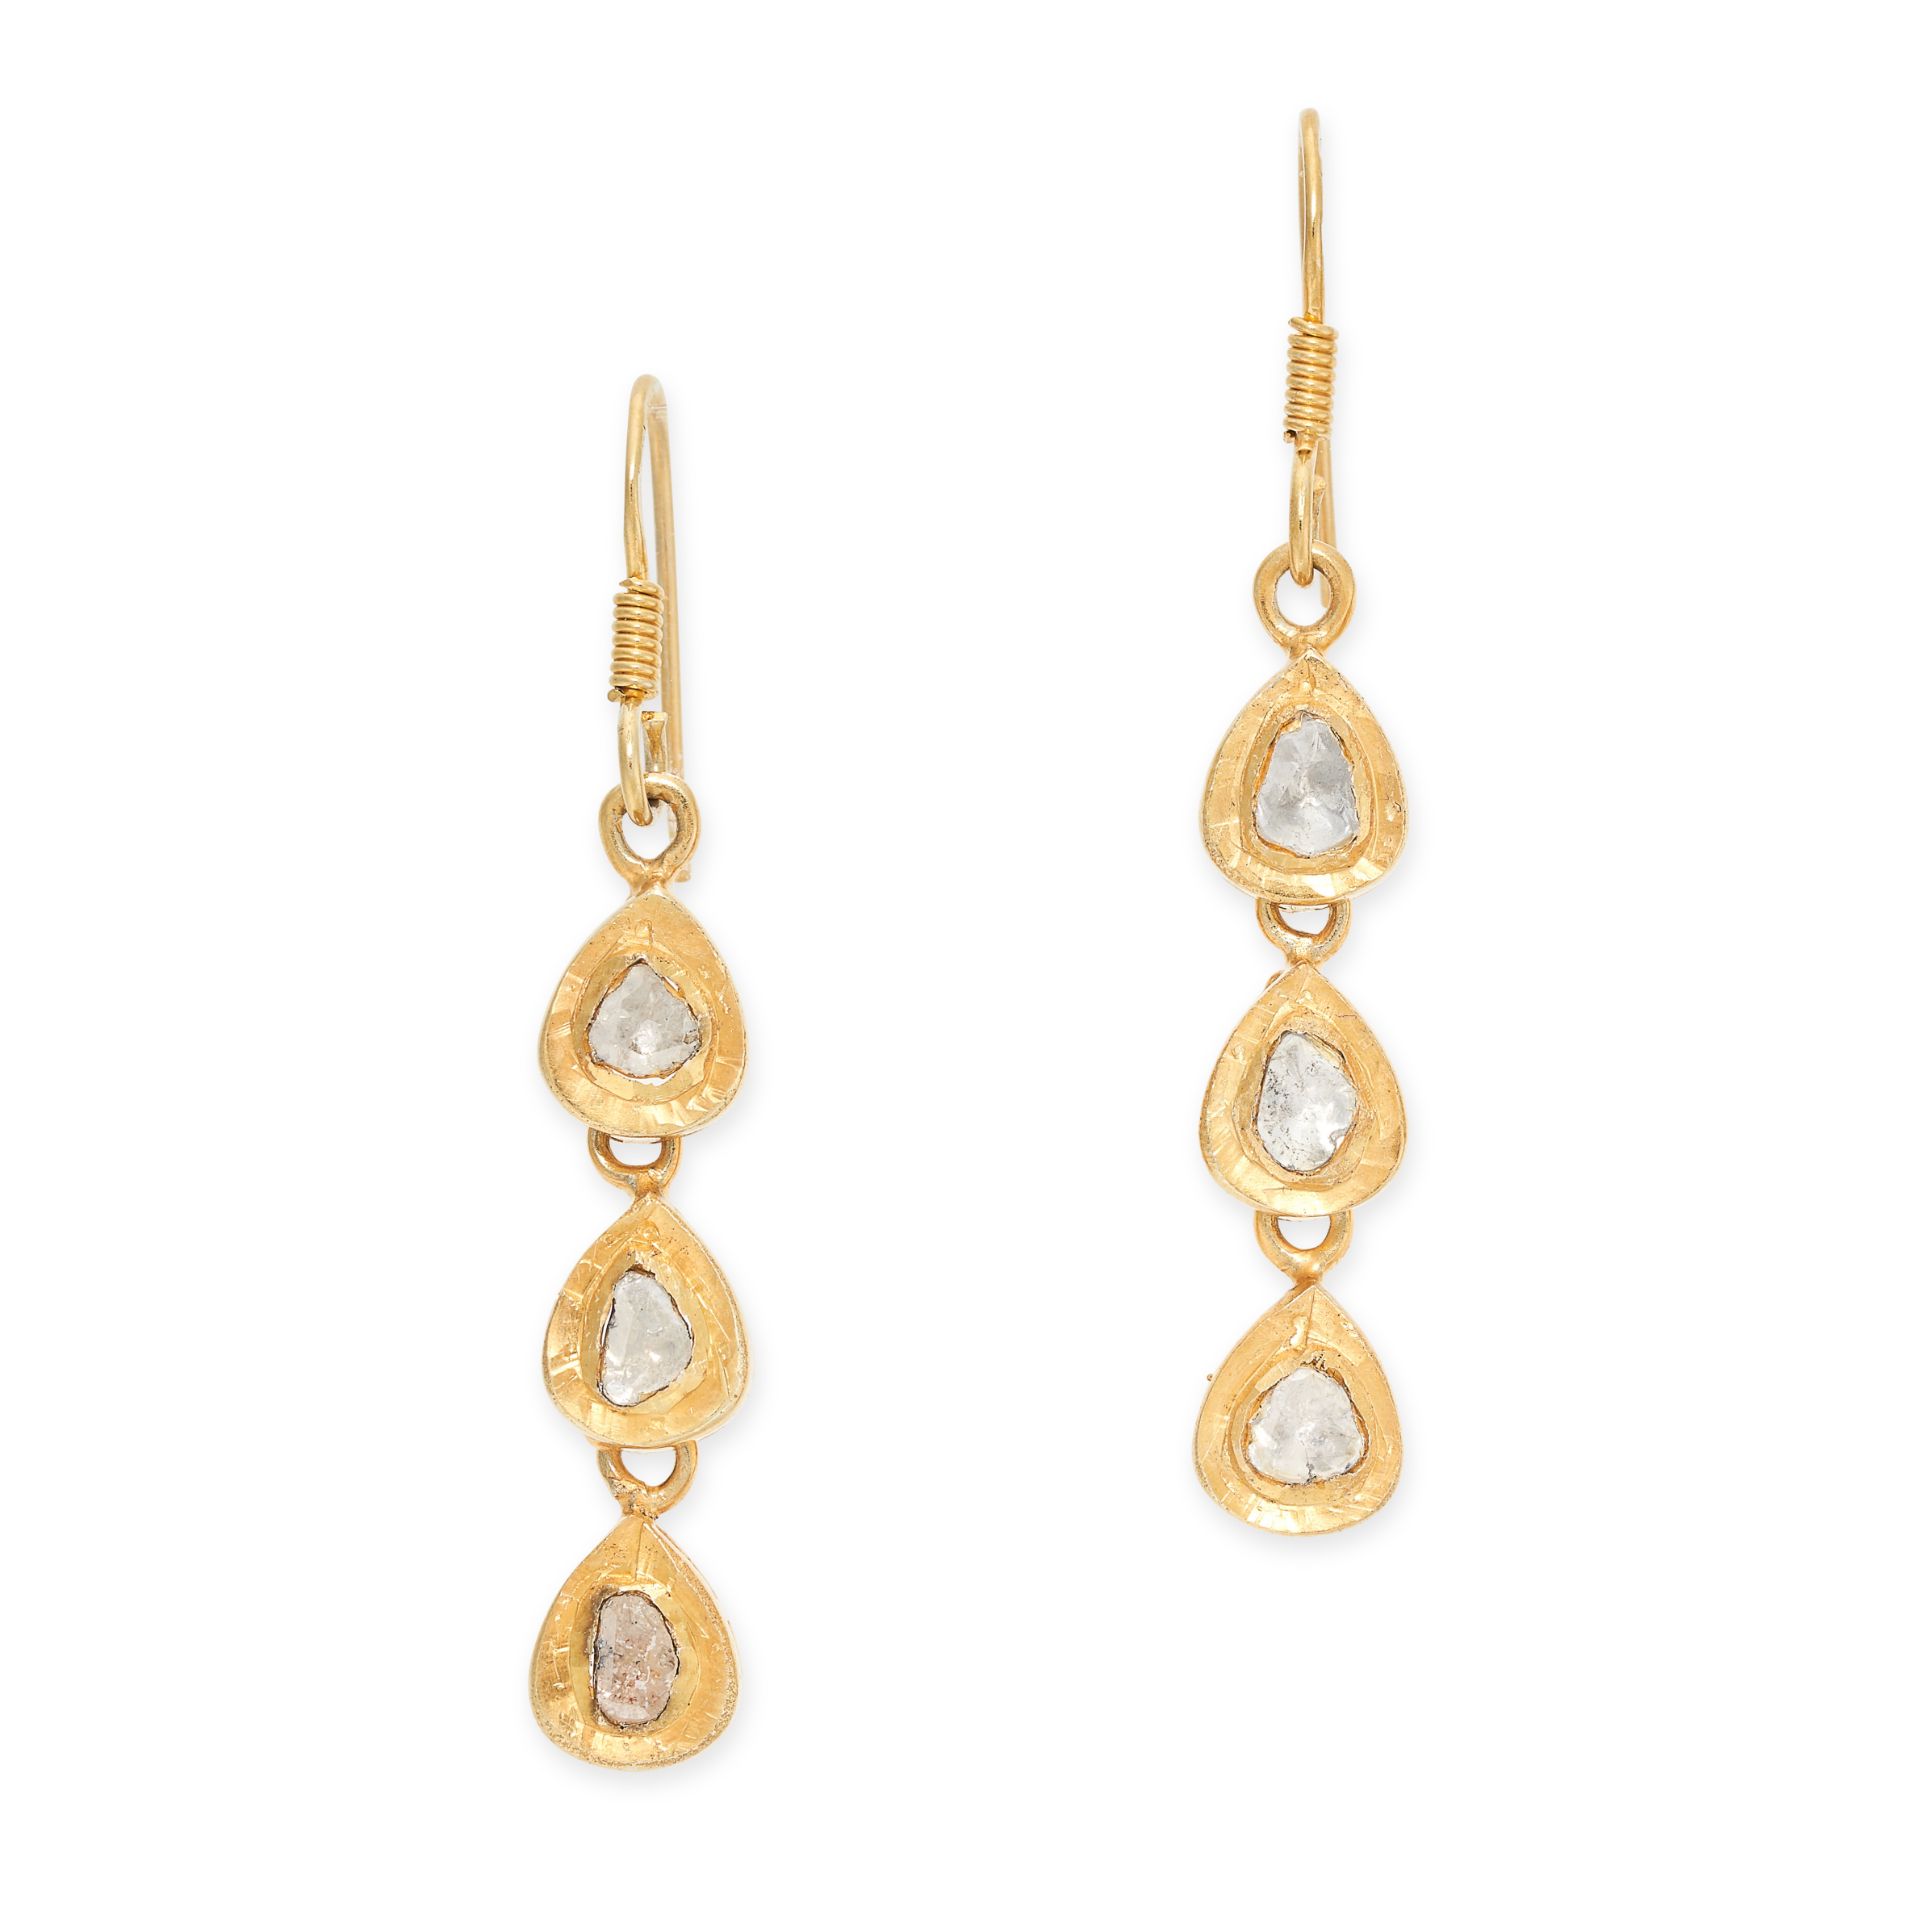 A PAIR OF DIAMOND DROP EARRINGS each set with three flat cut diamonds, stamped 925, 4.4cm, 4.7g.